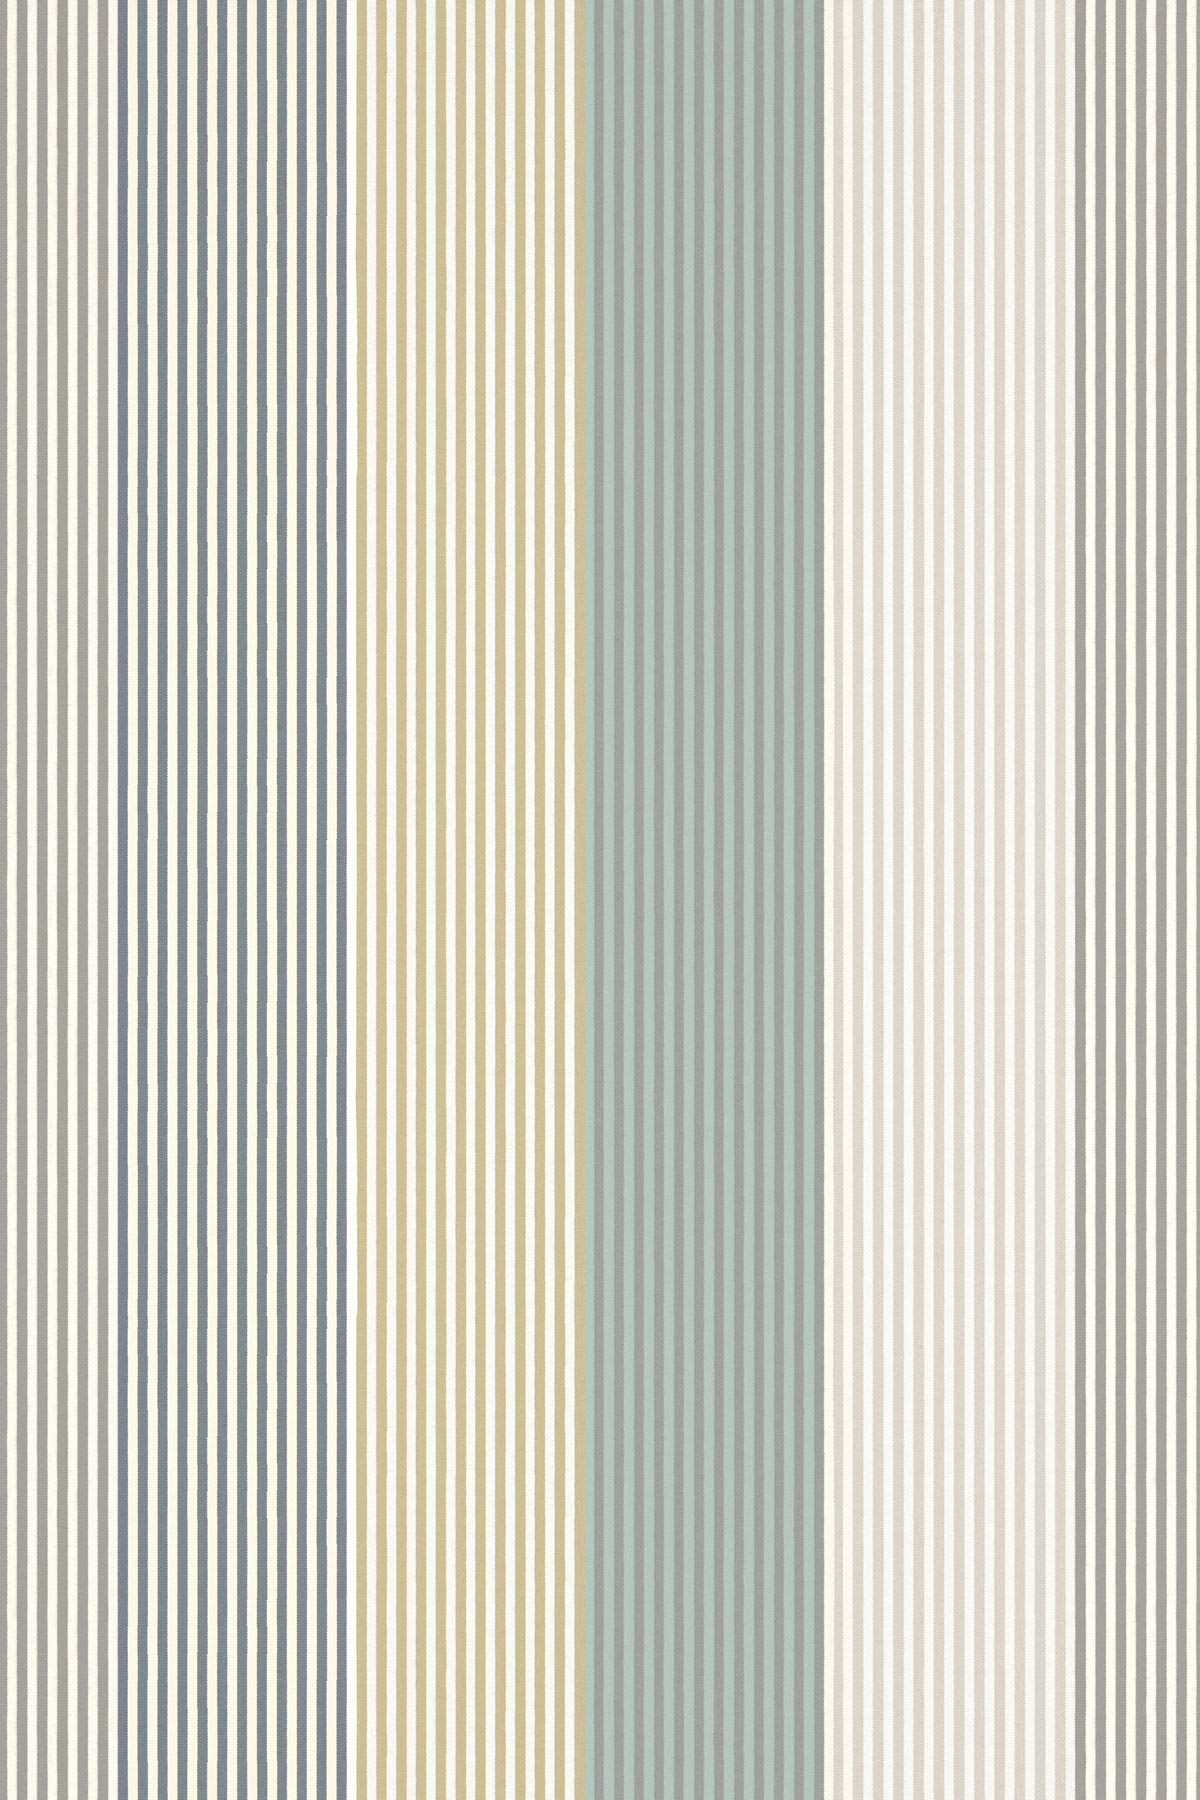 Funfair Stripe Fabric - Calico / Cloud / Pebble / Duck Egg - by Harlequin